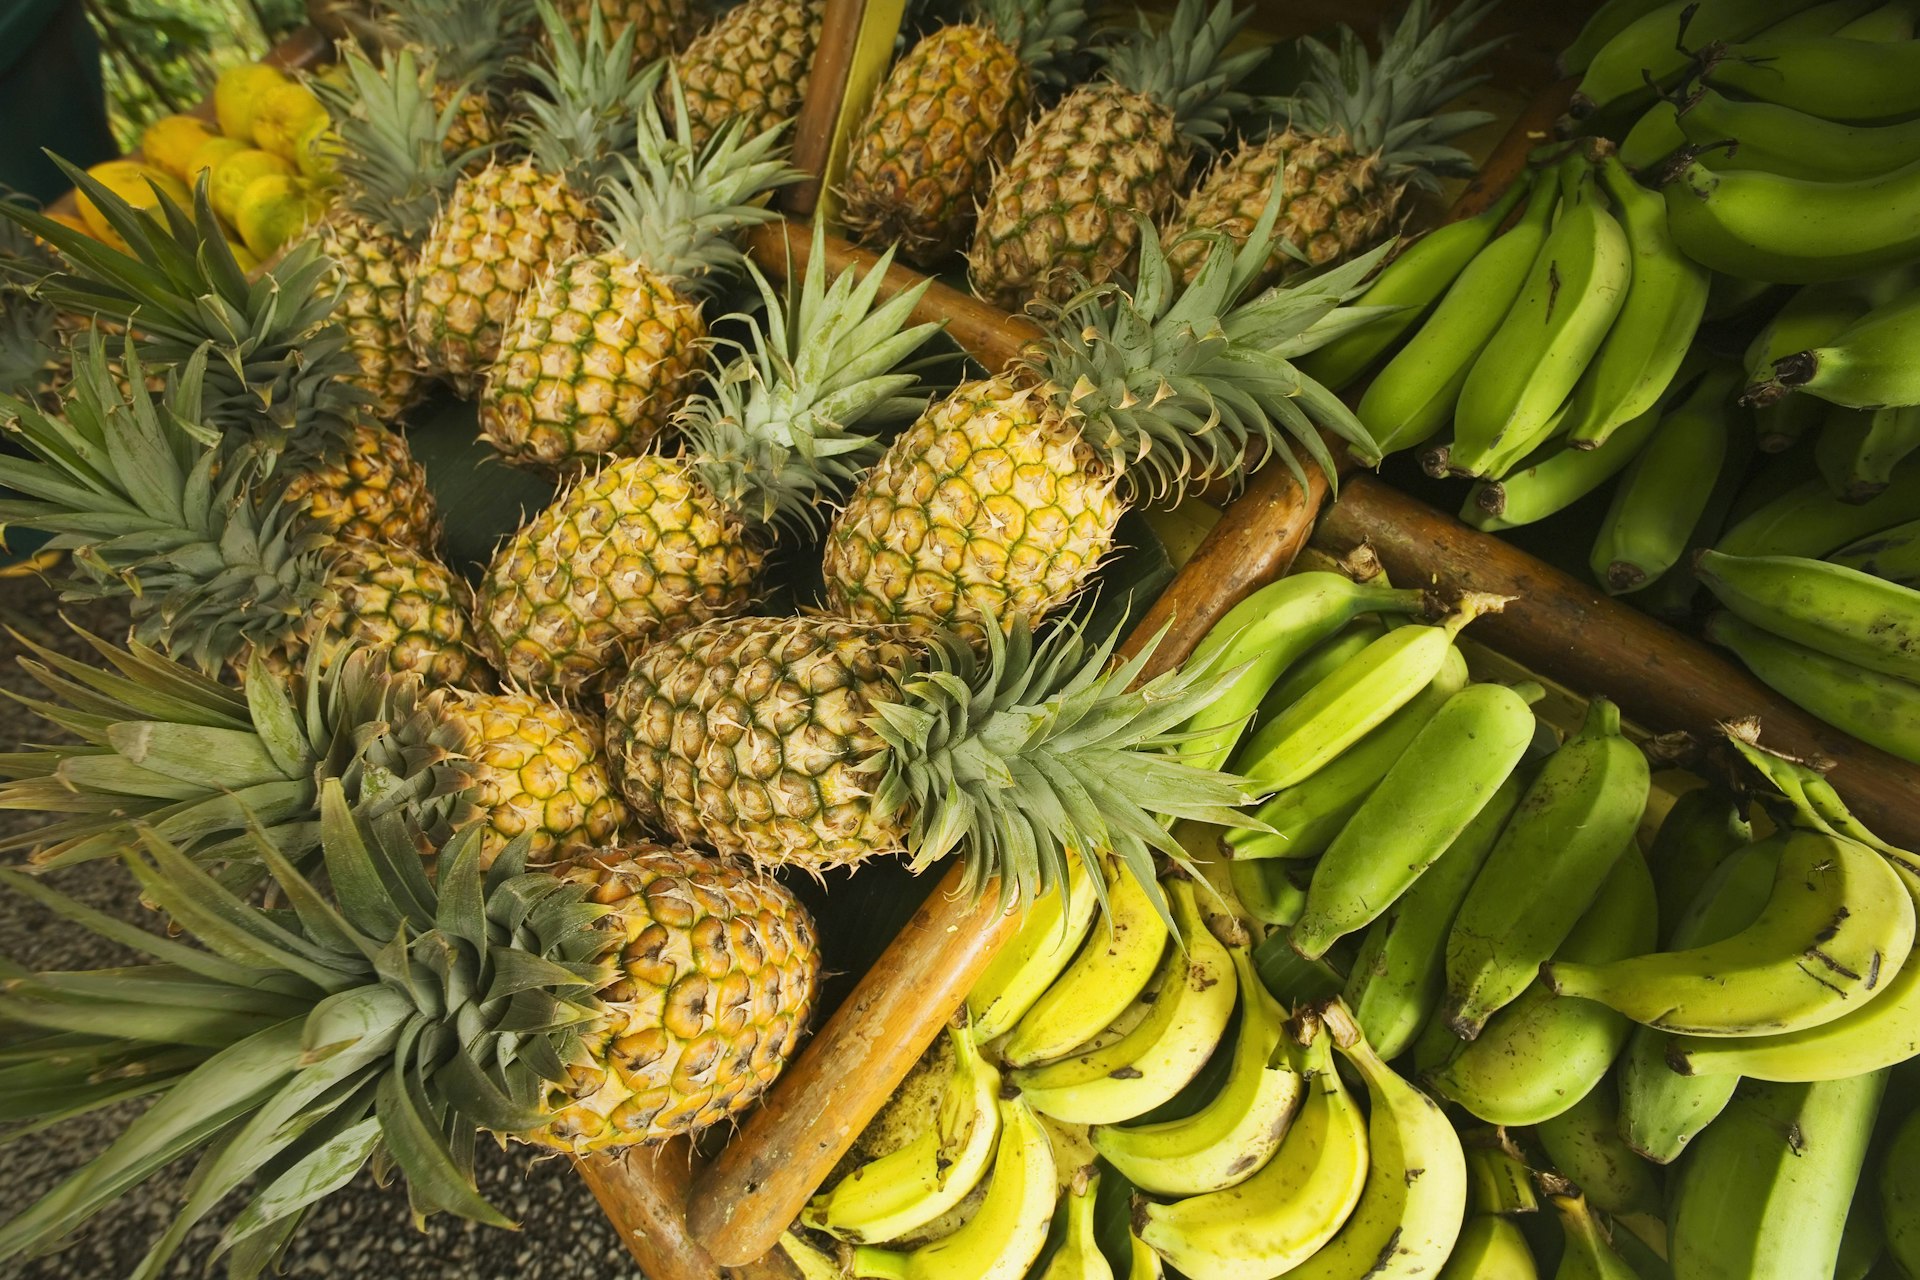 Pineapples and bananas at a fruit stand in Maui. Image by Ron Dahlquist / Design Pics / Perspectives / Getty